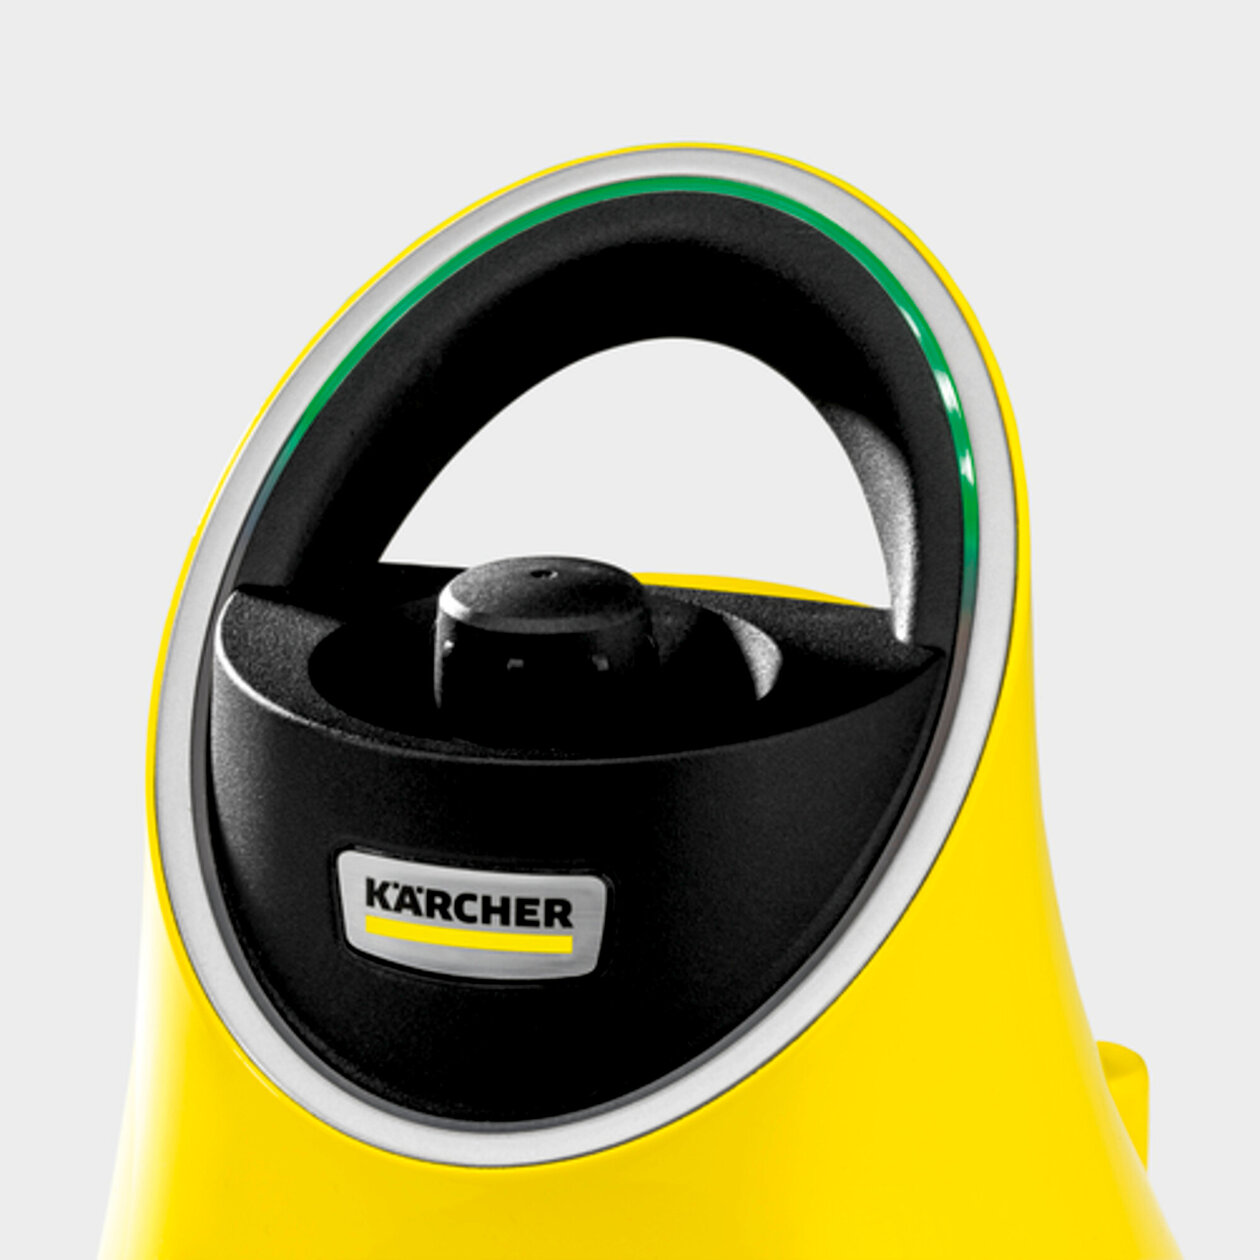 Steam cleaner SC 2 Deluxe EasyFix: LED light display on the device